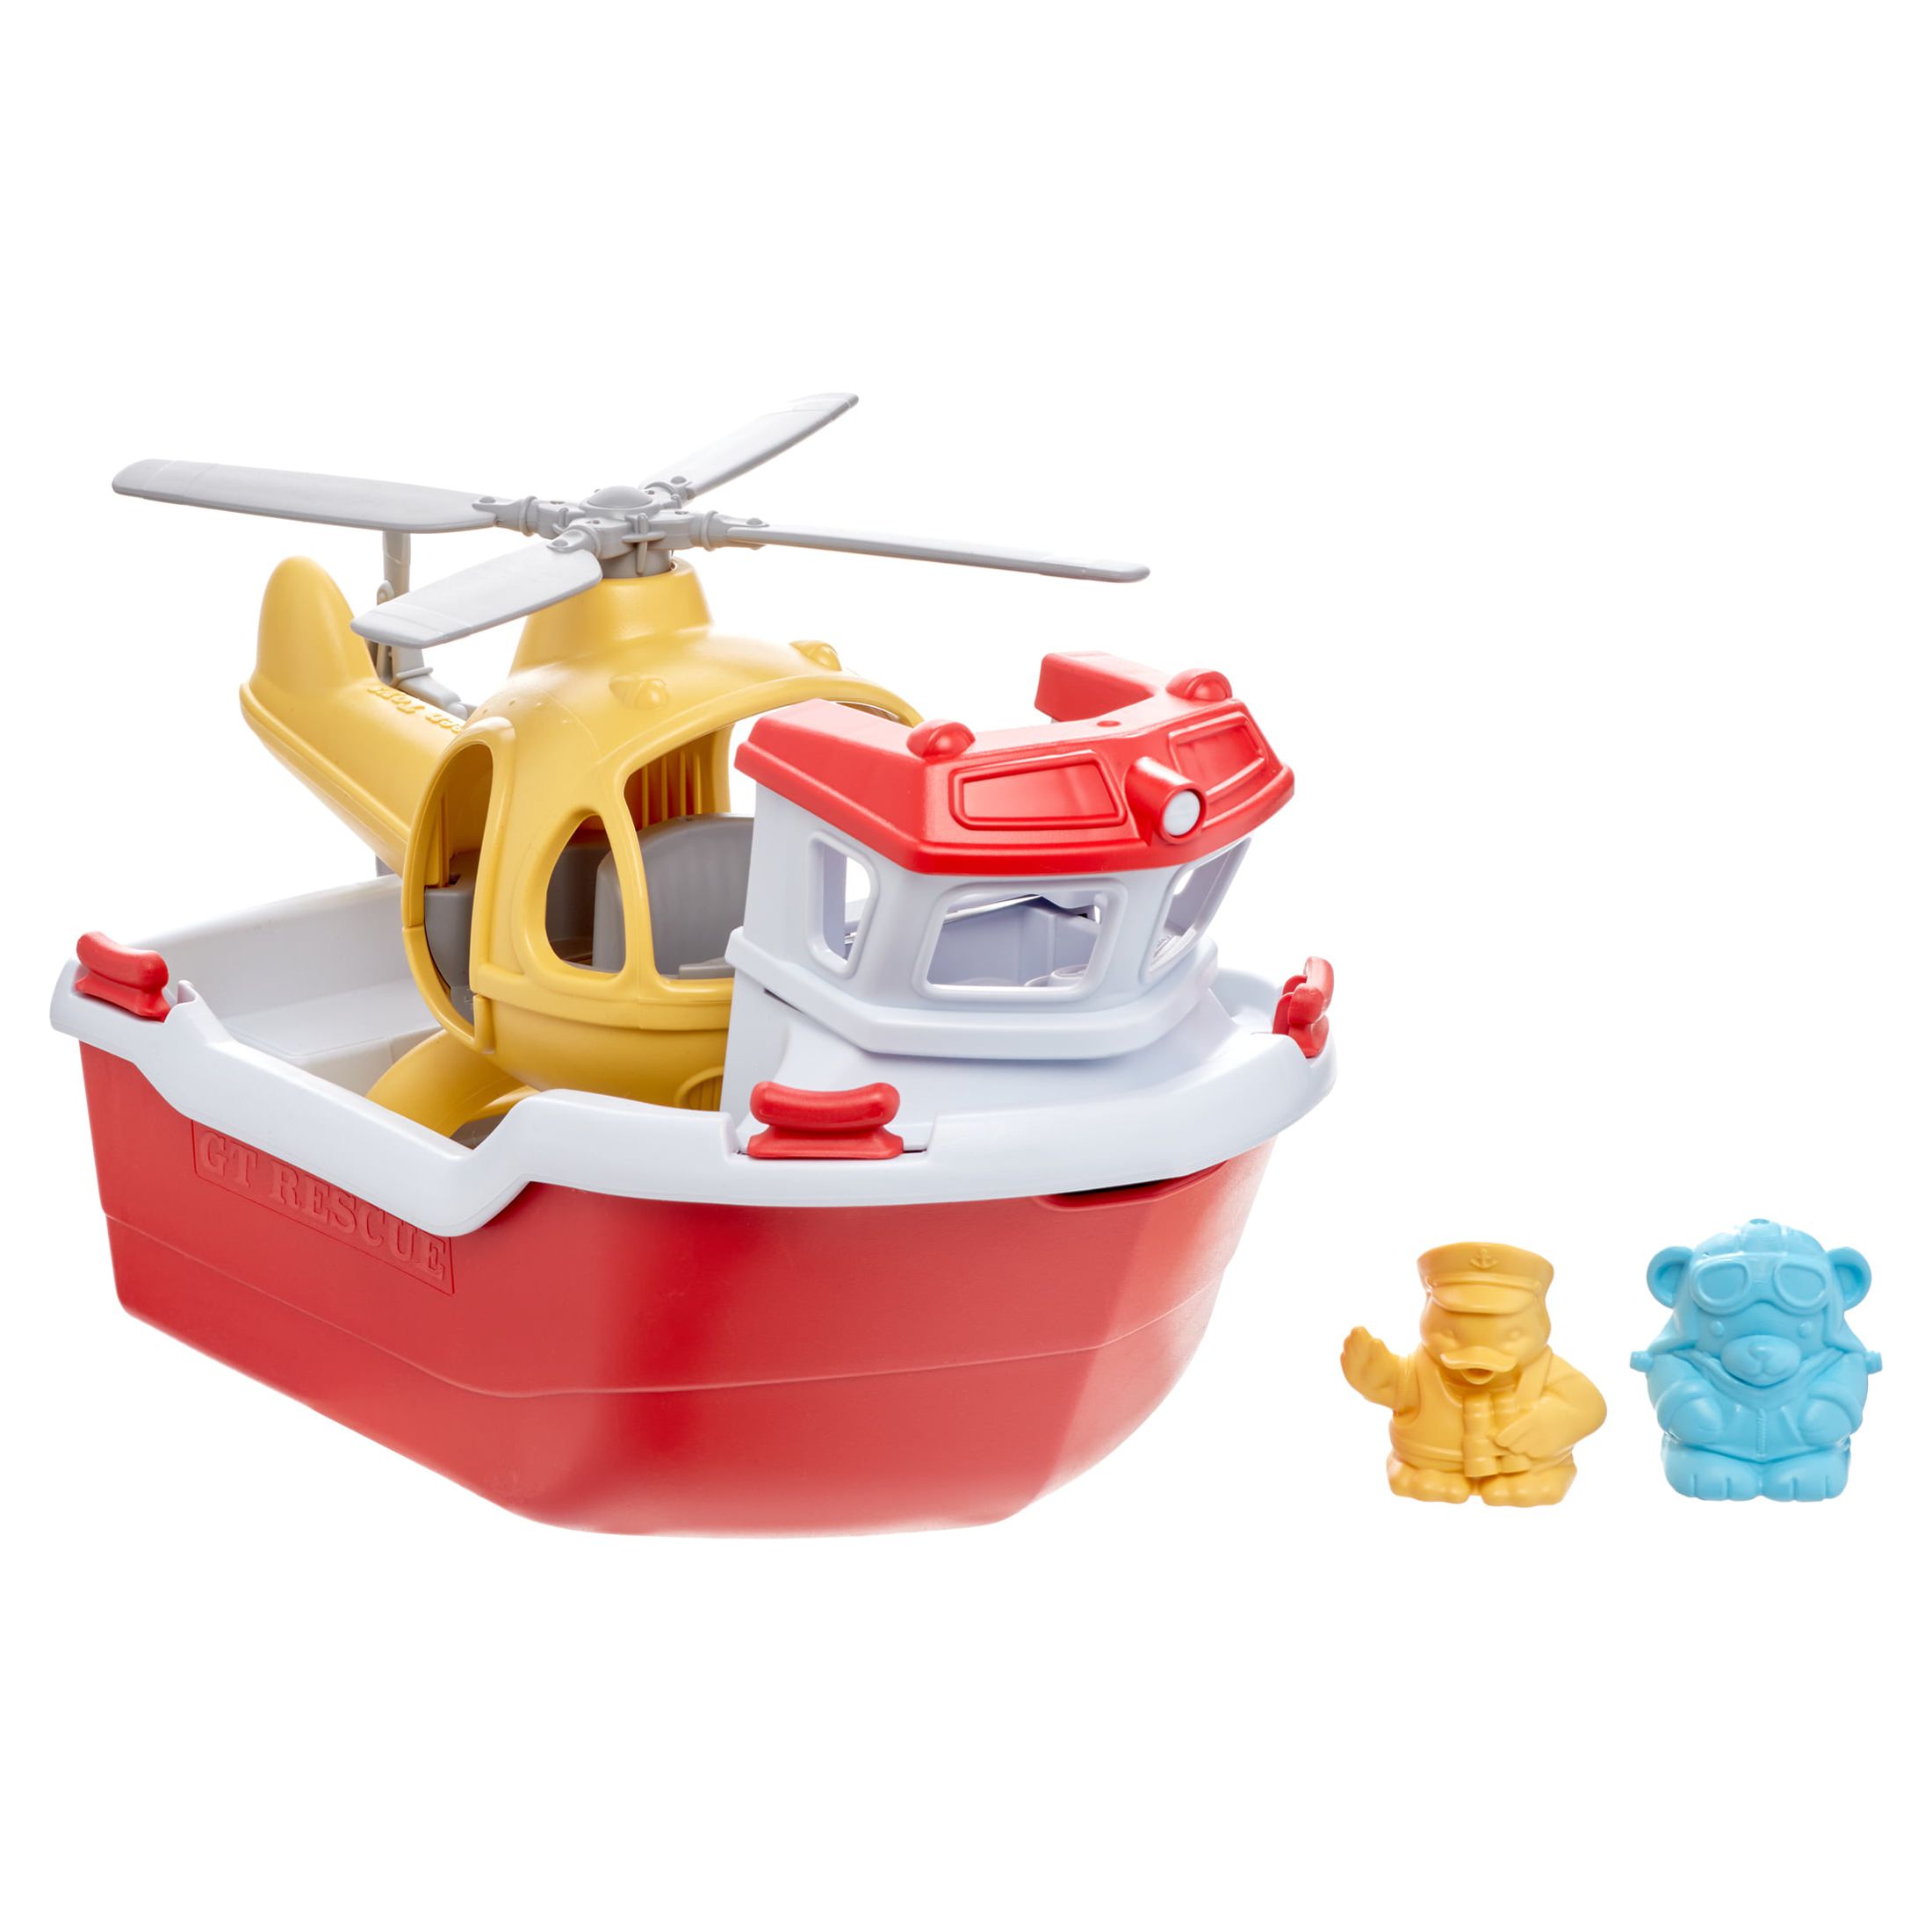 Green Toys Rescue Boat & Helicopter with a Captain Duck and Pilot Bear - image 4 of 10